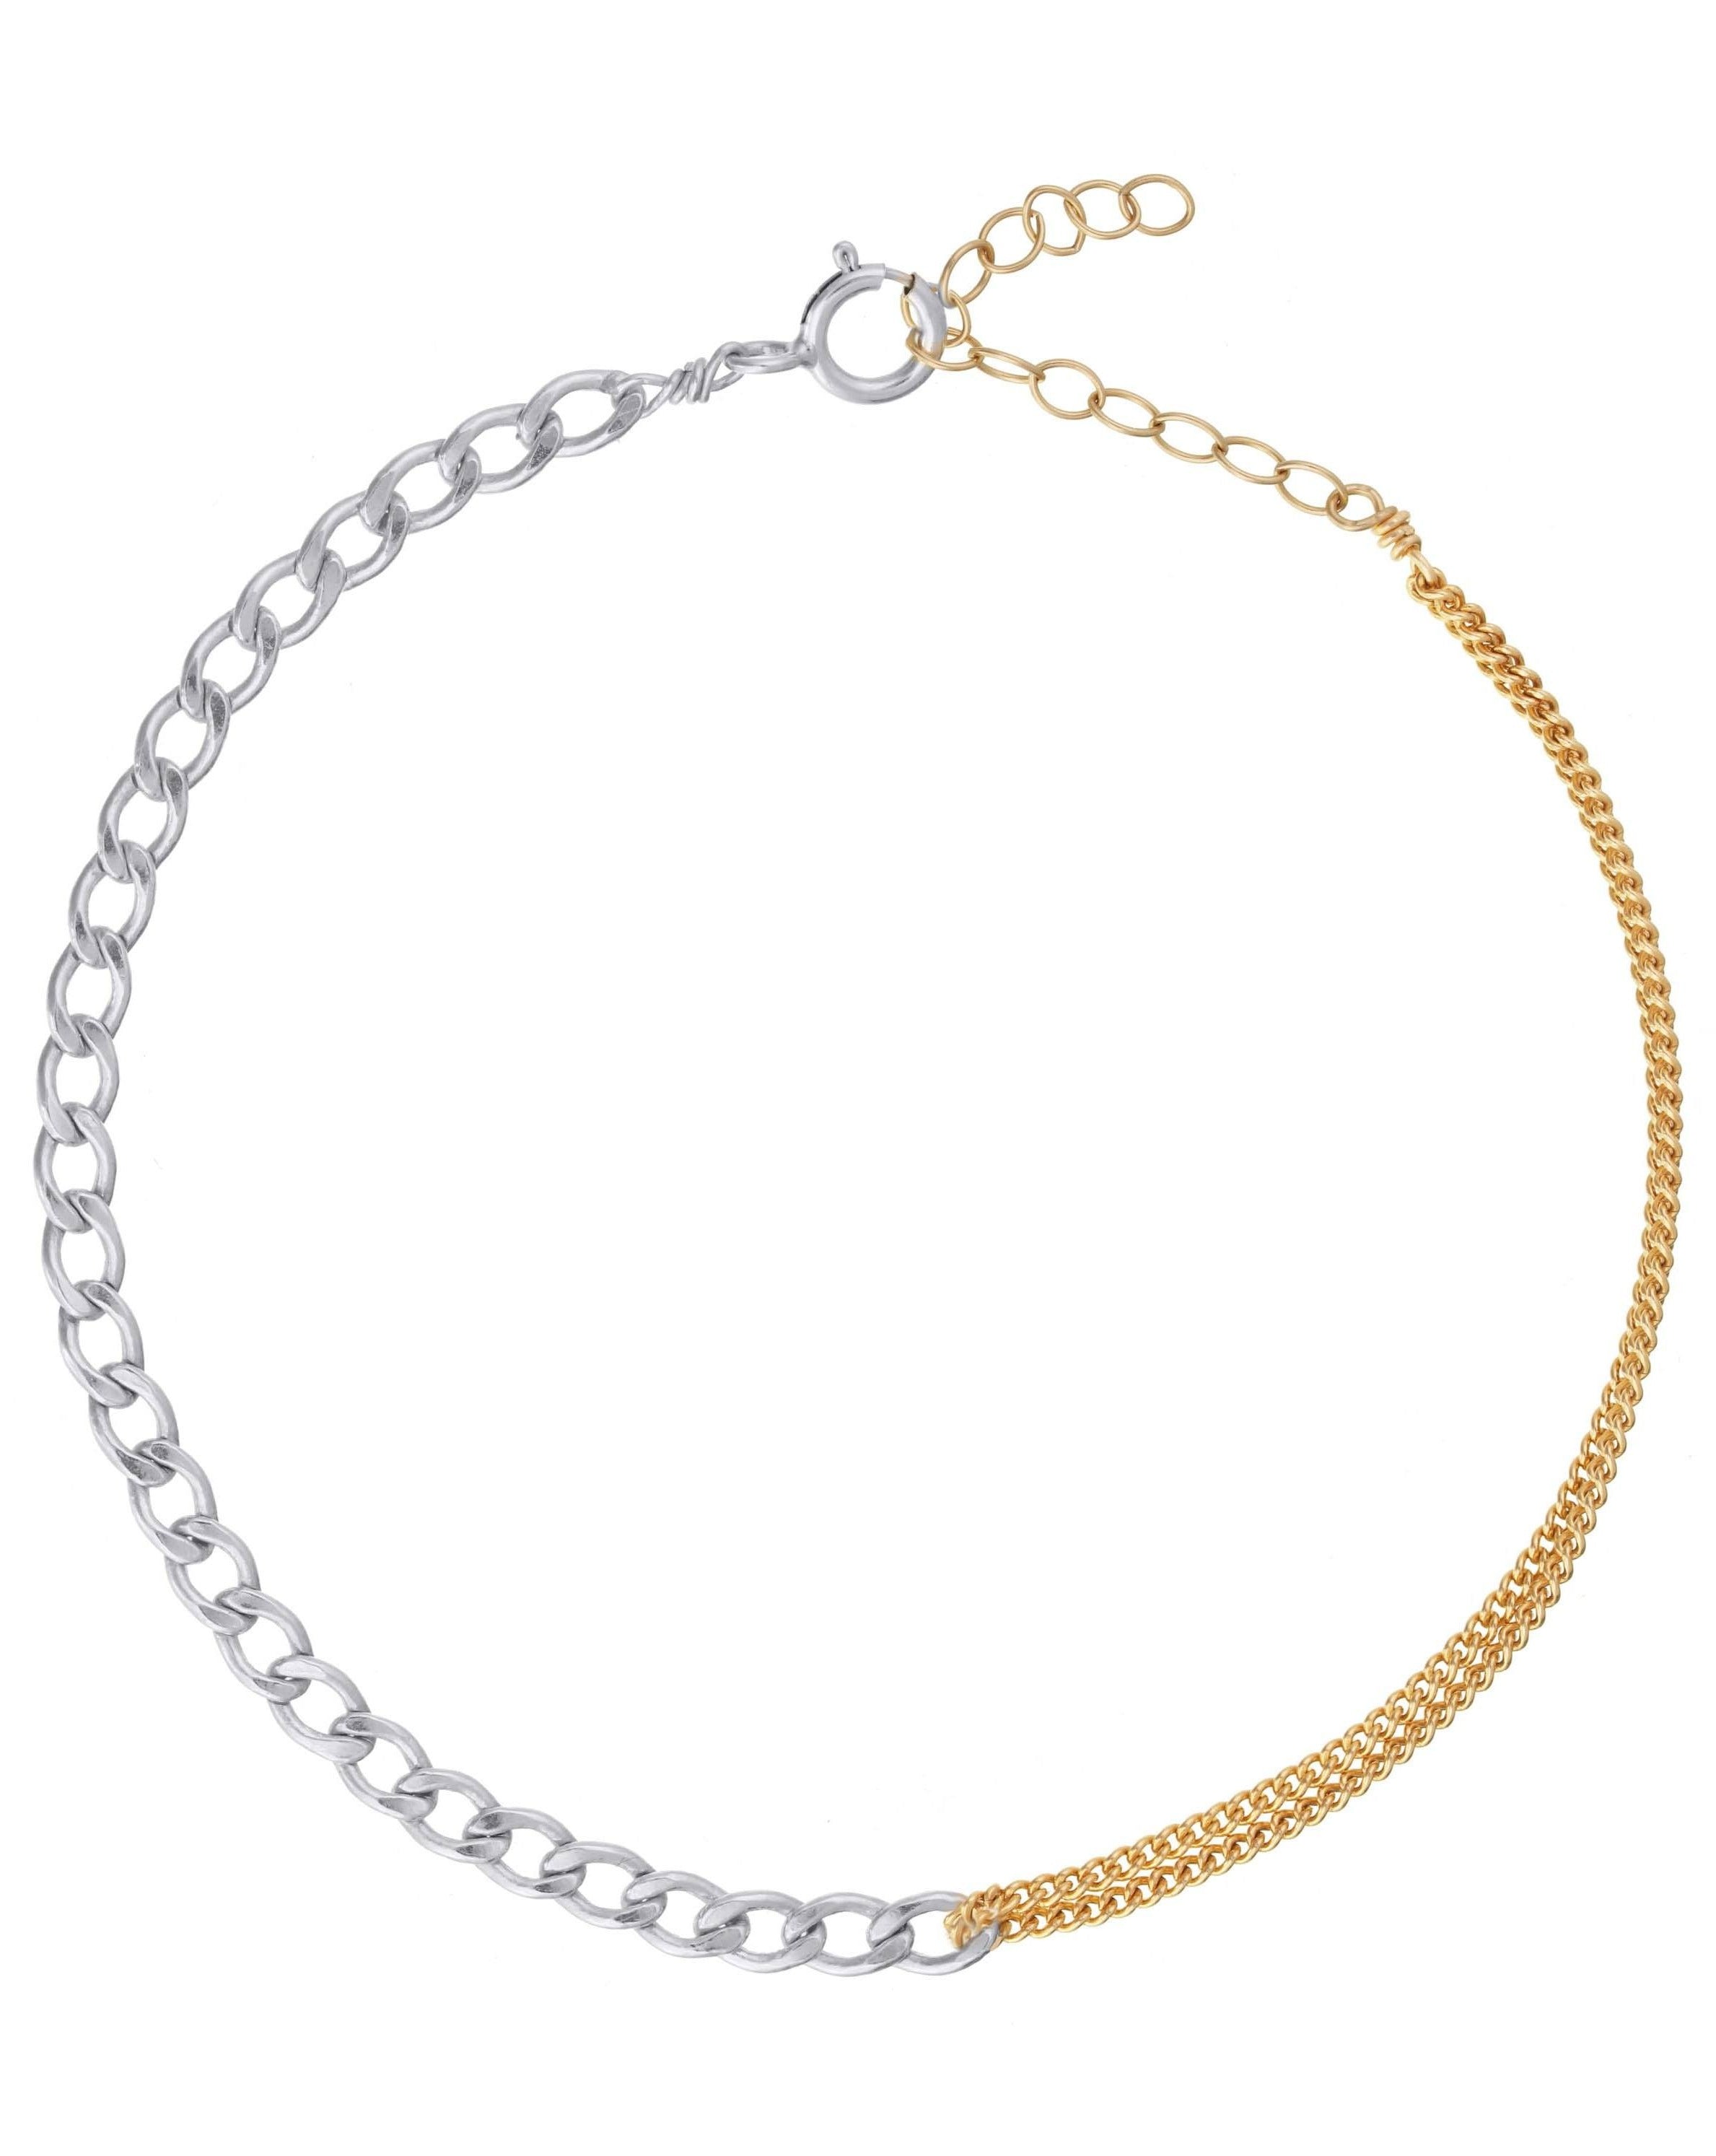 Moni Bracelet by KOZAKH. A 6 to 7 inch adjustable length two tone bracelet with 1mm Gold Filled flat curb chain on one half and 3mm Sterling Silver Cuban link chain on the other half.